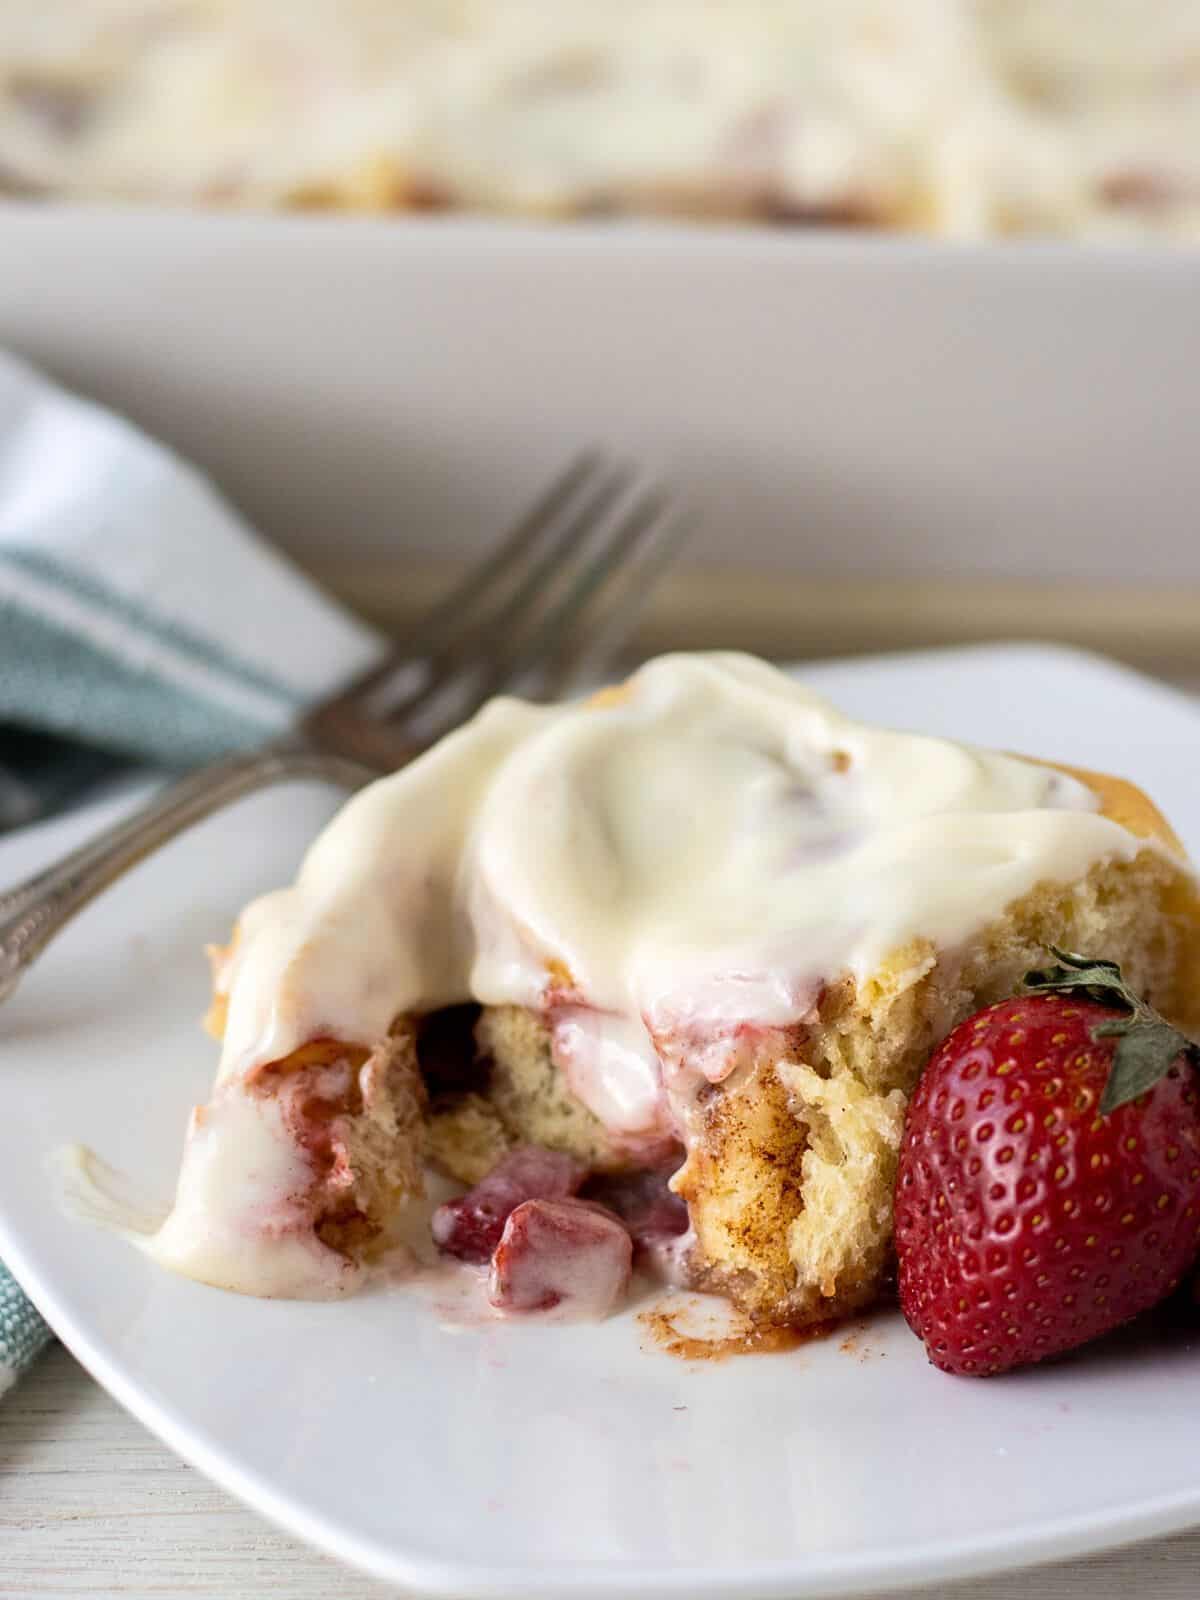 Strawberry cinnamon roll on a plate with a fork and a fresh strawberry.